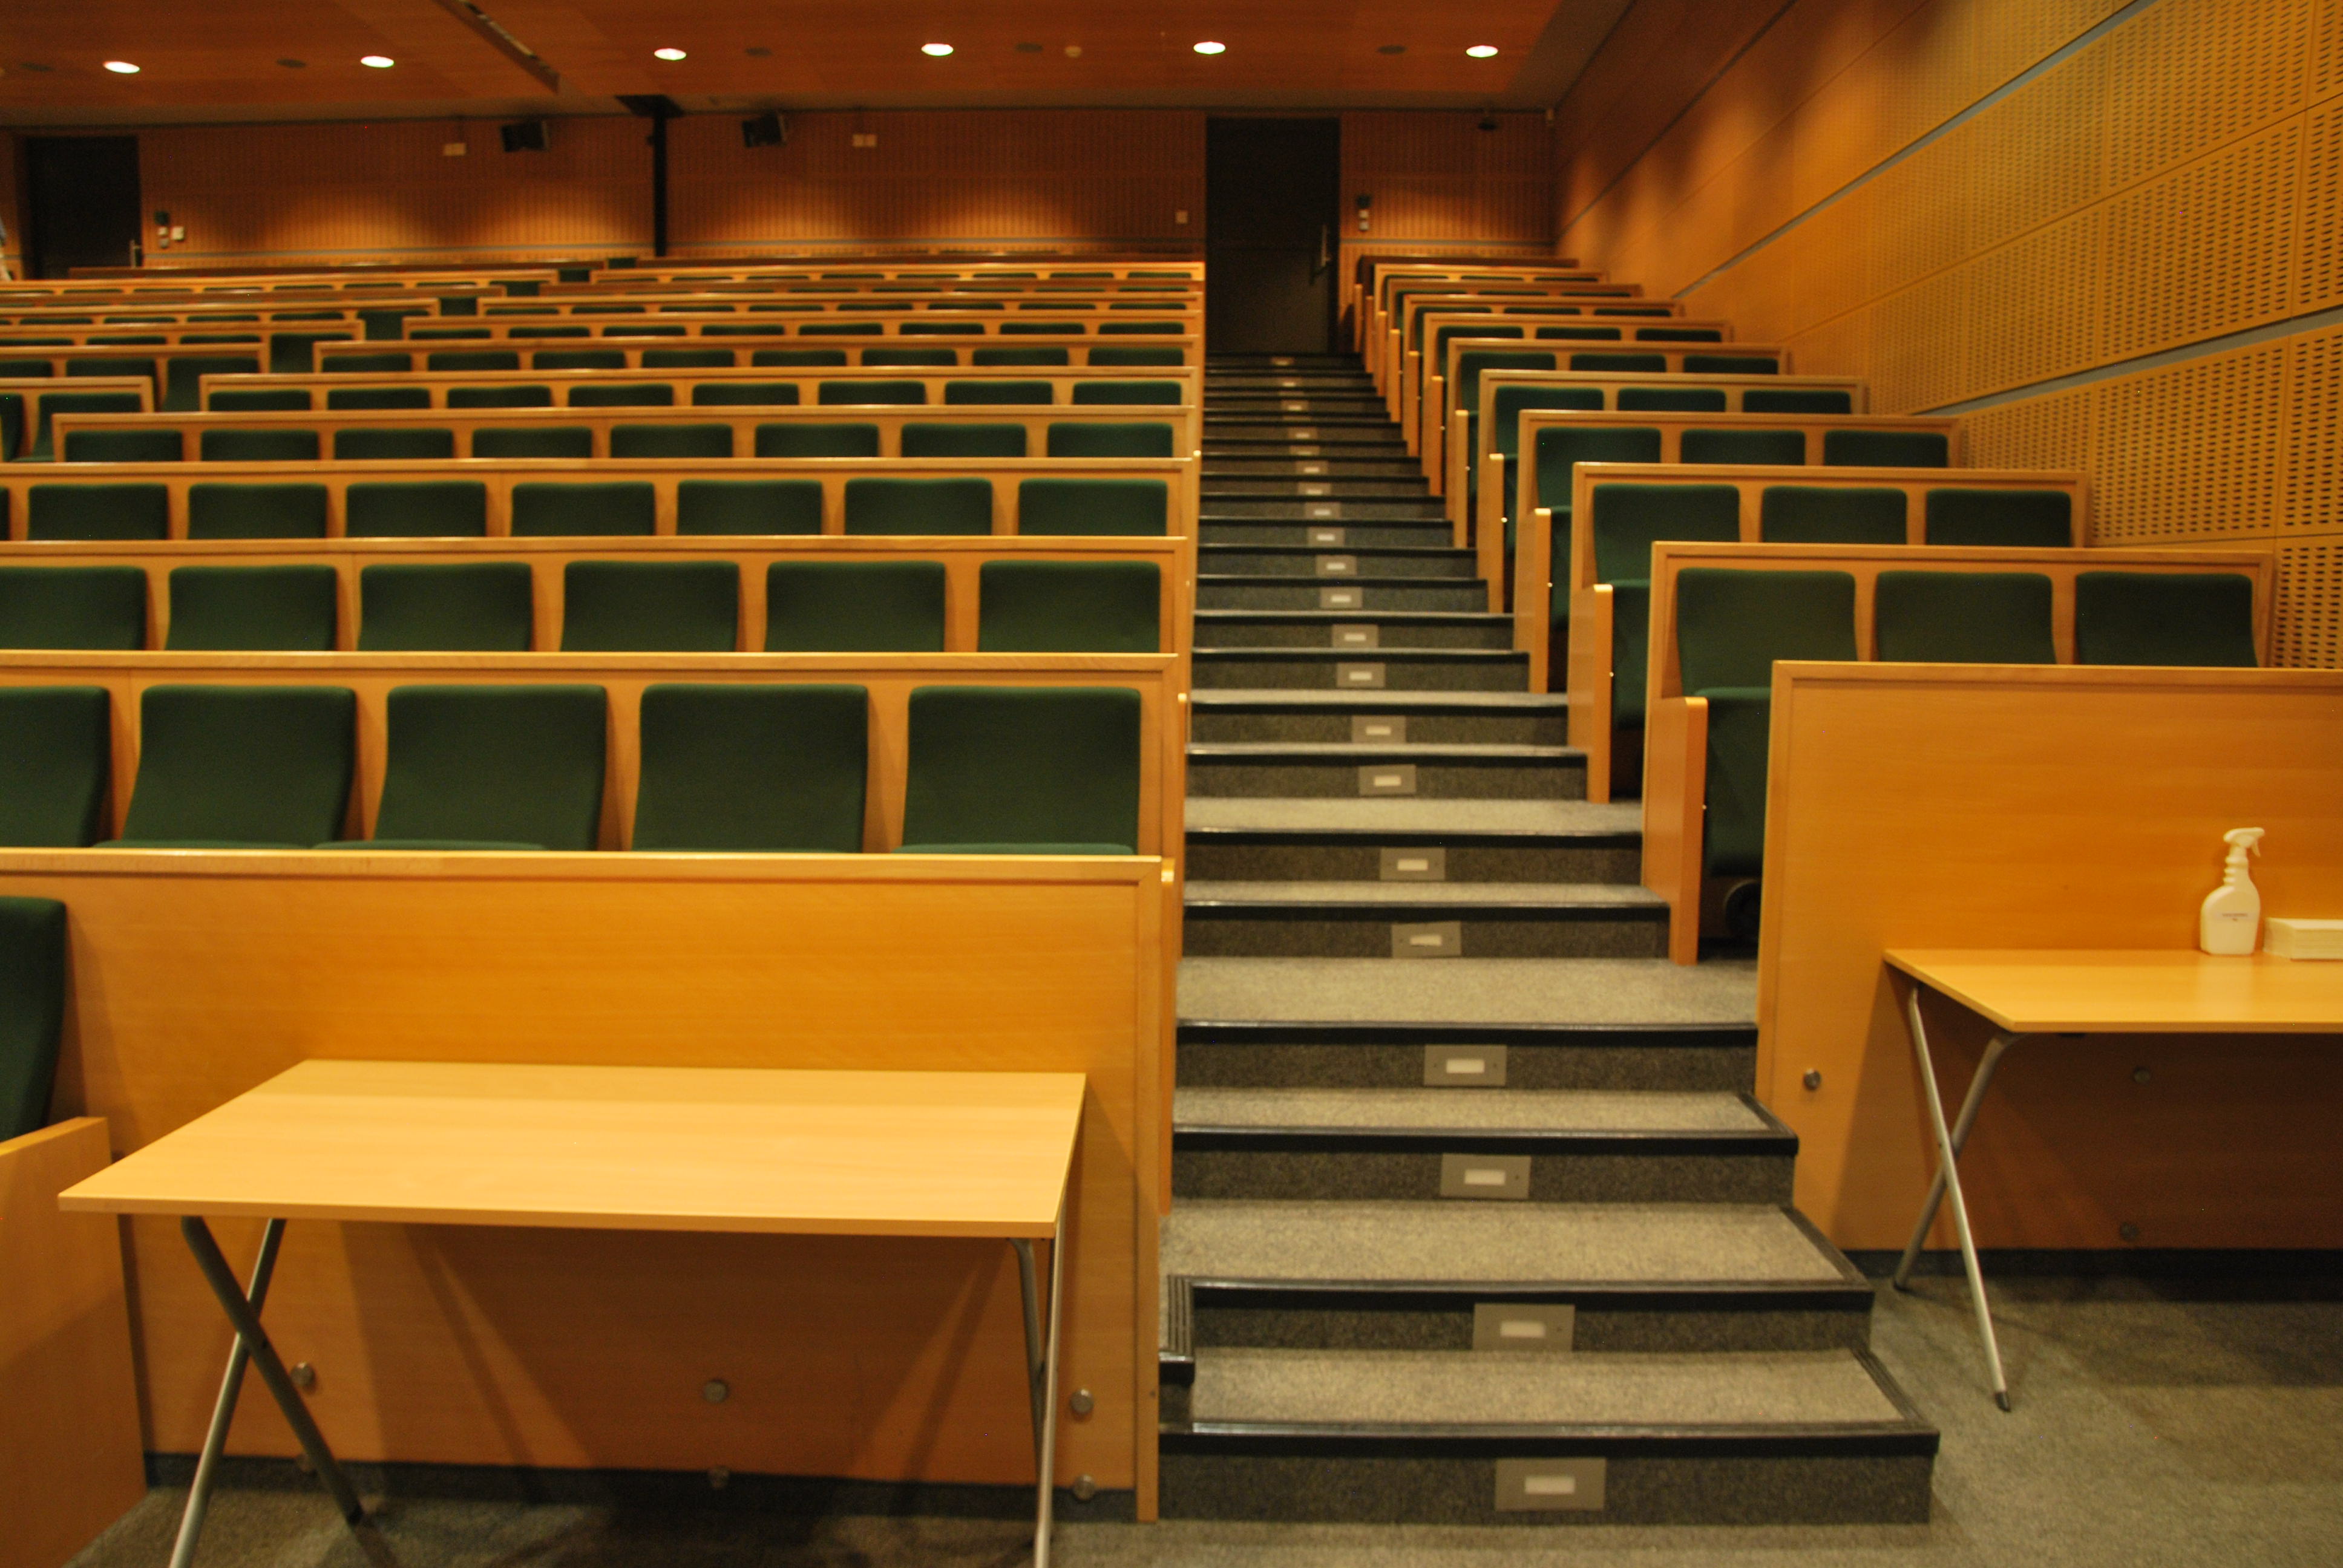 Medium Hall - a room with an amphitheatre layout. To the right is a row of triple seats with a drop-down lectern, and to the left are further rows of seats where the lectern can also be lowered. In the first row, there are movable tables and a space where a wheelchair can be placed.